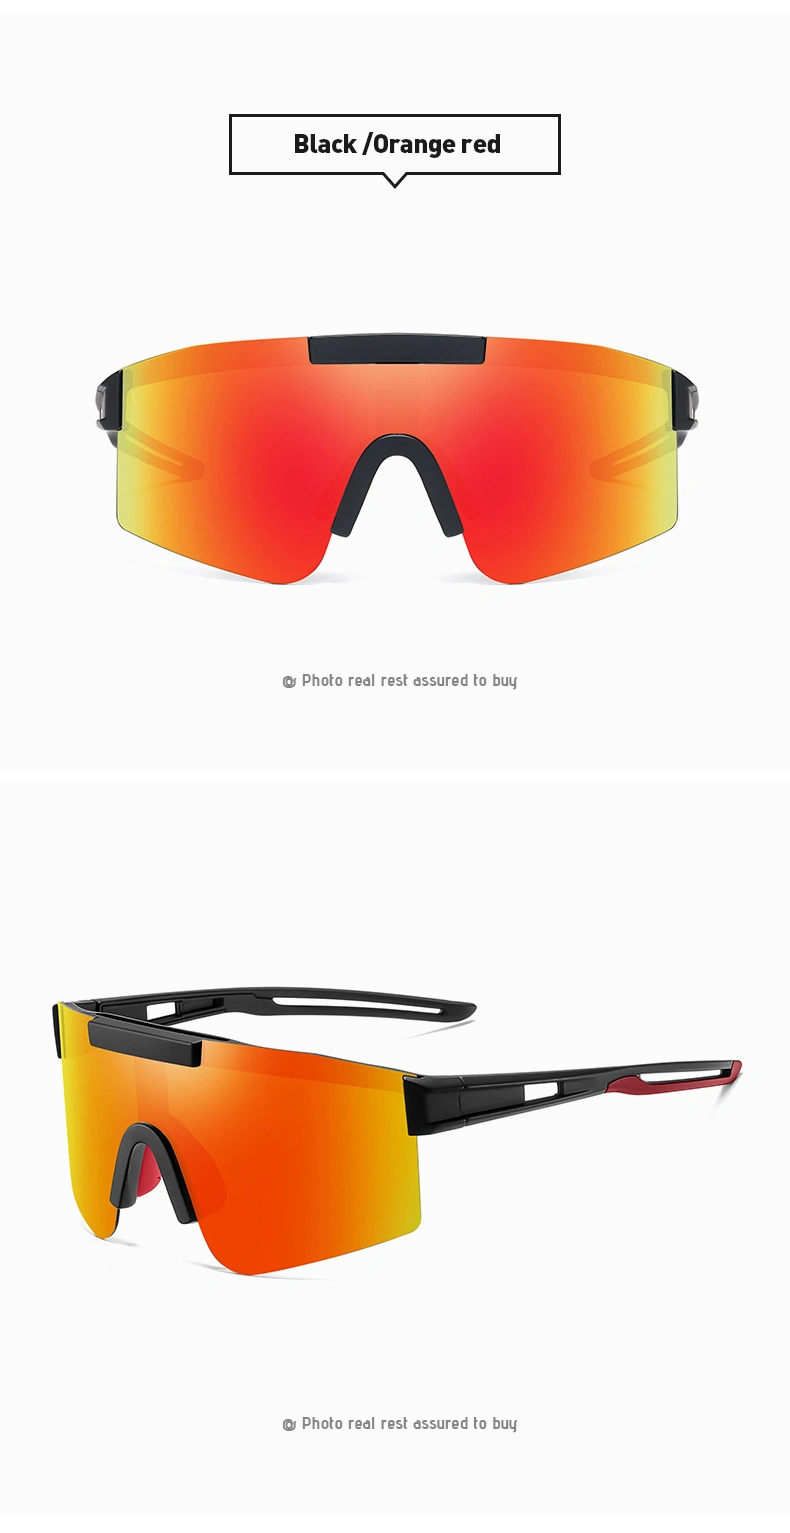 2023 New Style Hot Selling Men and Women Fashion Trend Cycling Sports Outdoor Polarized UV400 Sunglasses